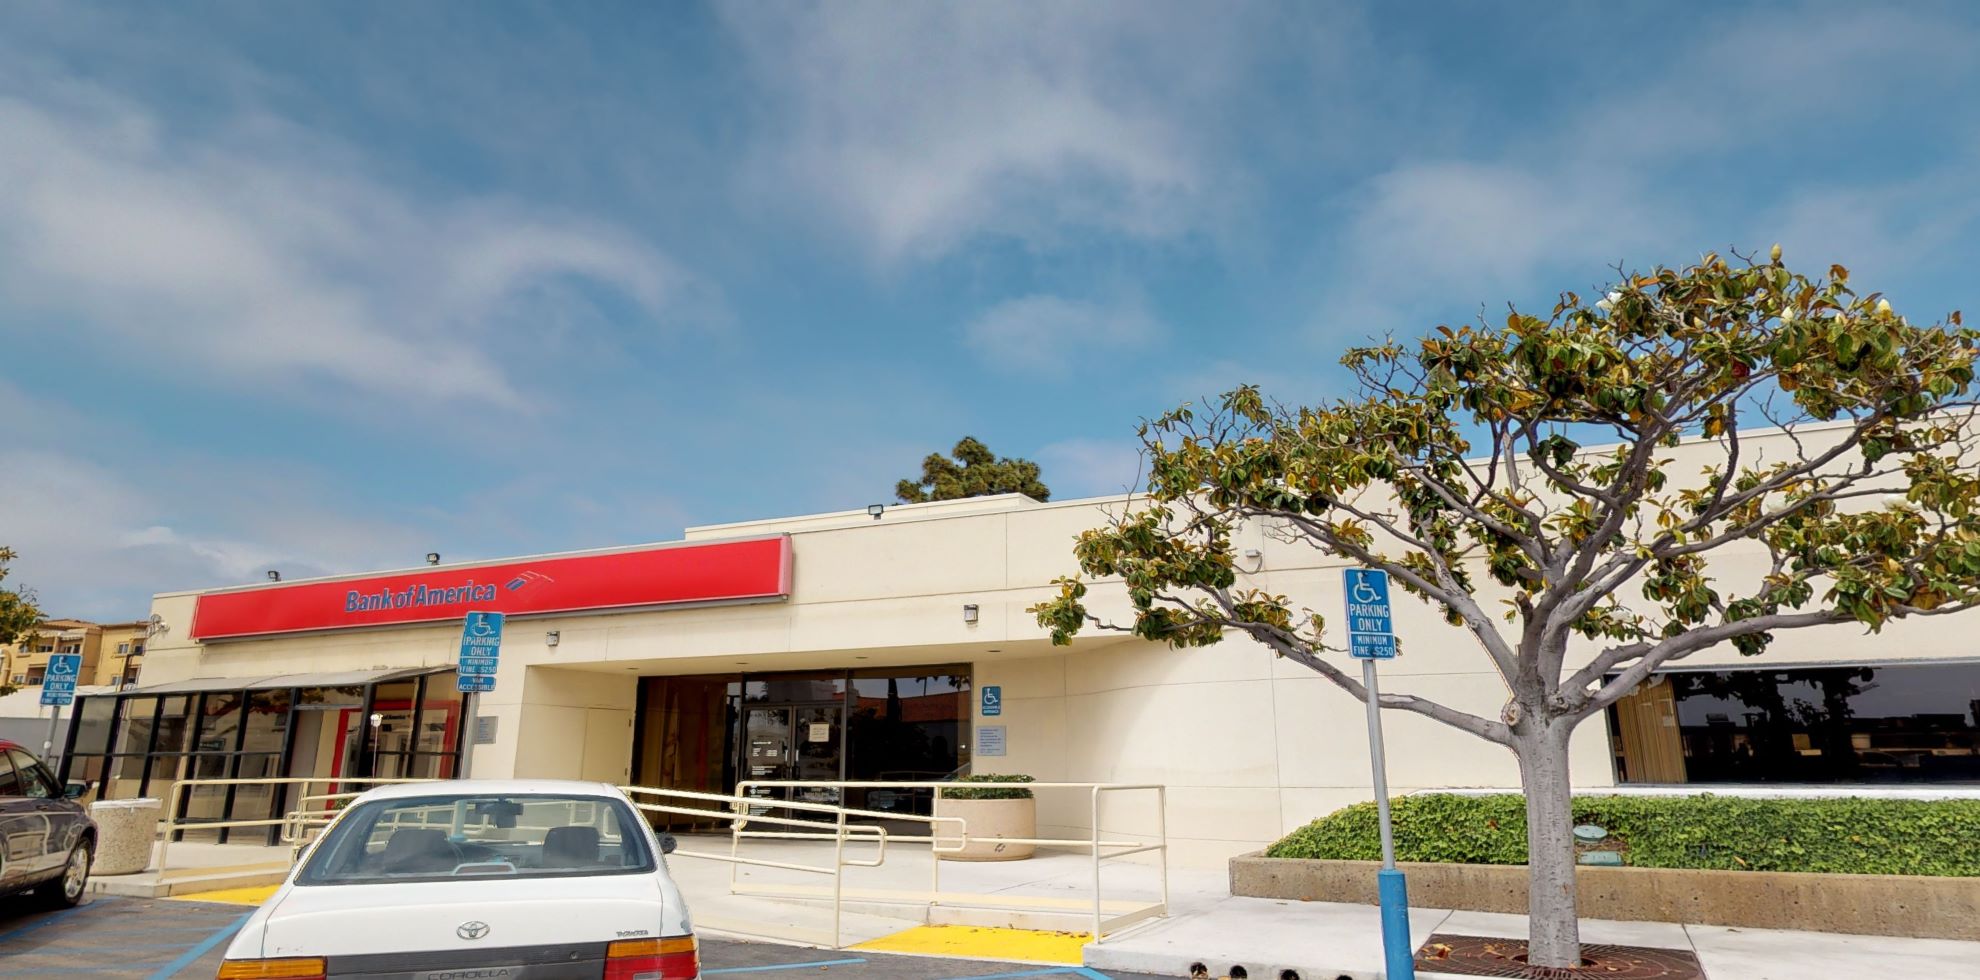 Bank of America financial center with walk-up ATM | 702 Mission Ave, Oceanside, CA 92054